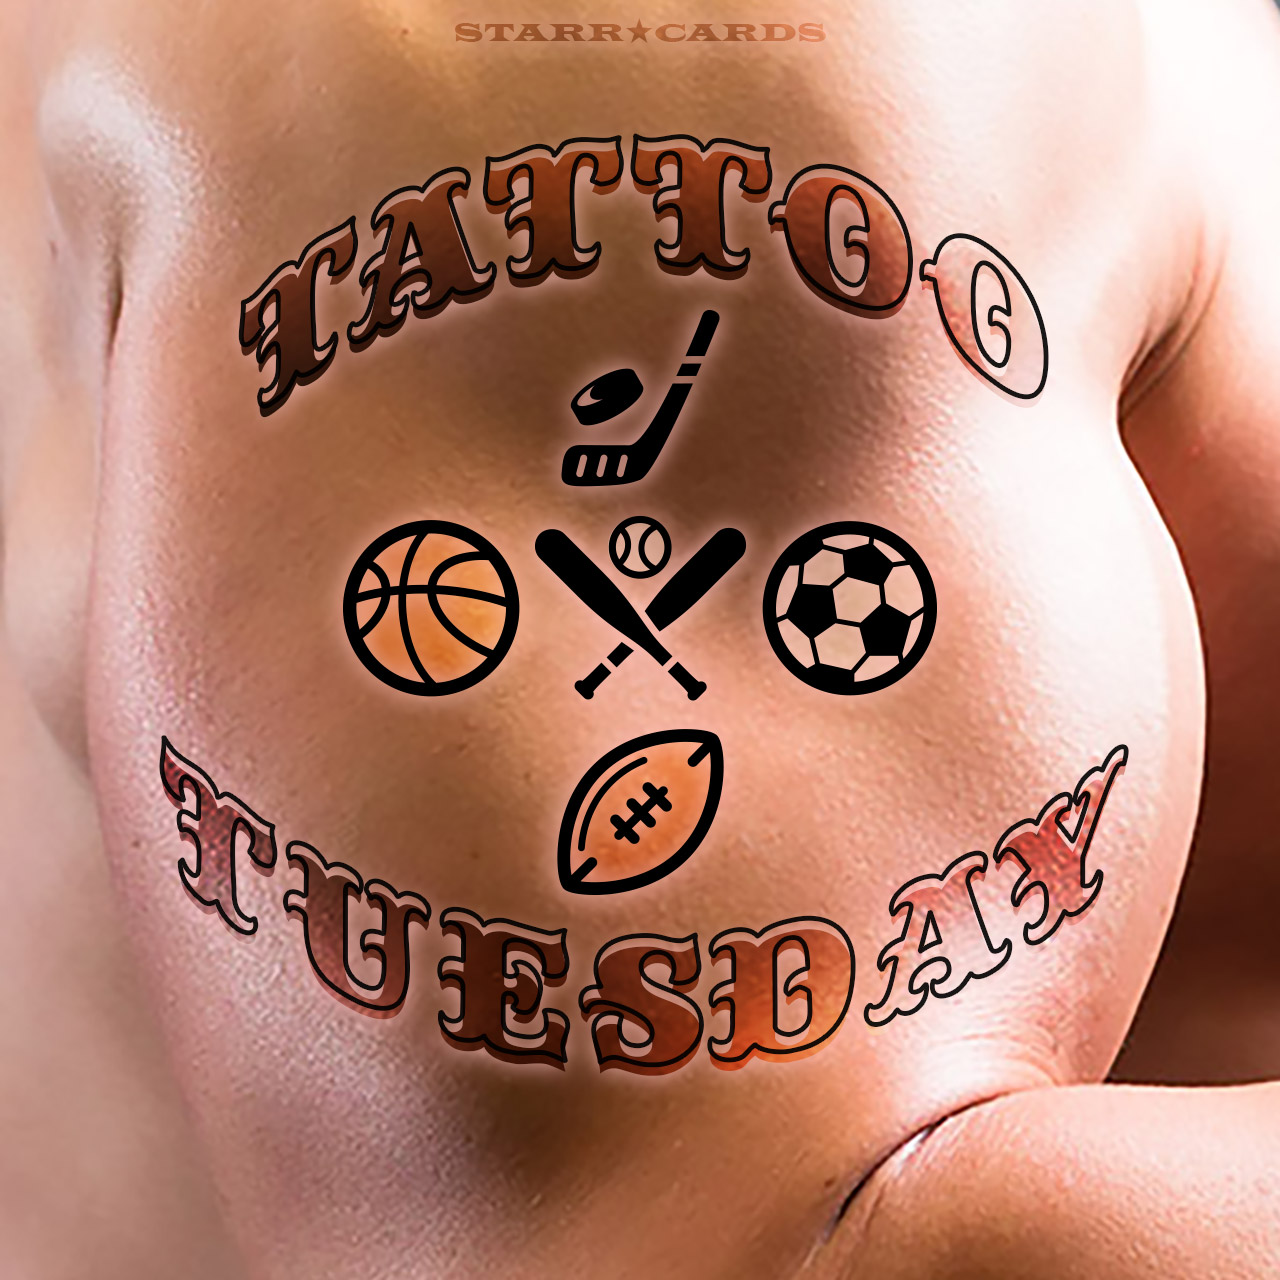 Tattoo Tuesday: Check out the best Chicago Bull fans' ink